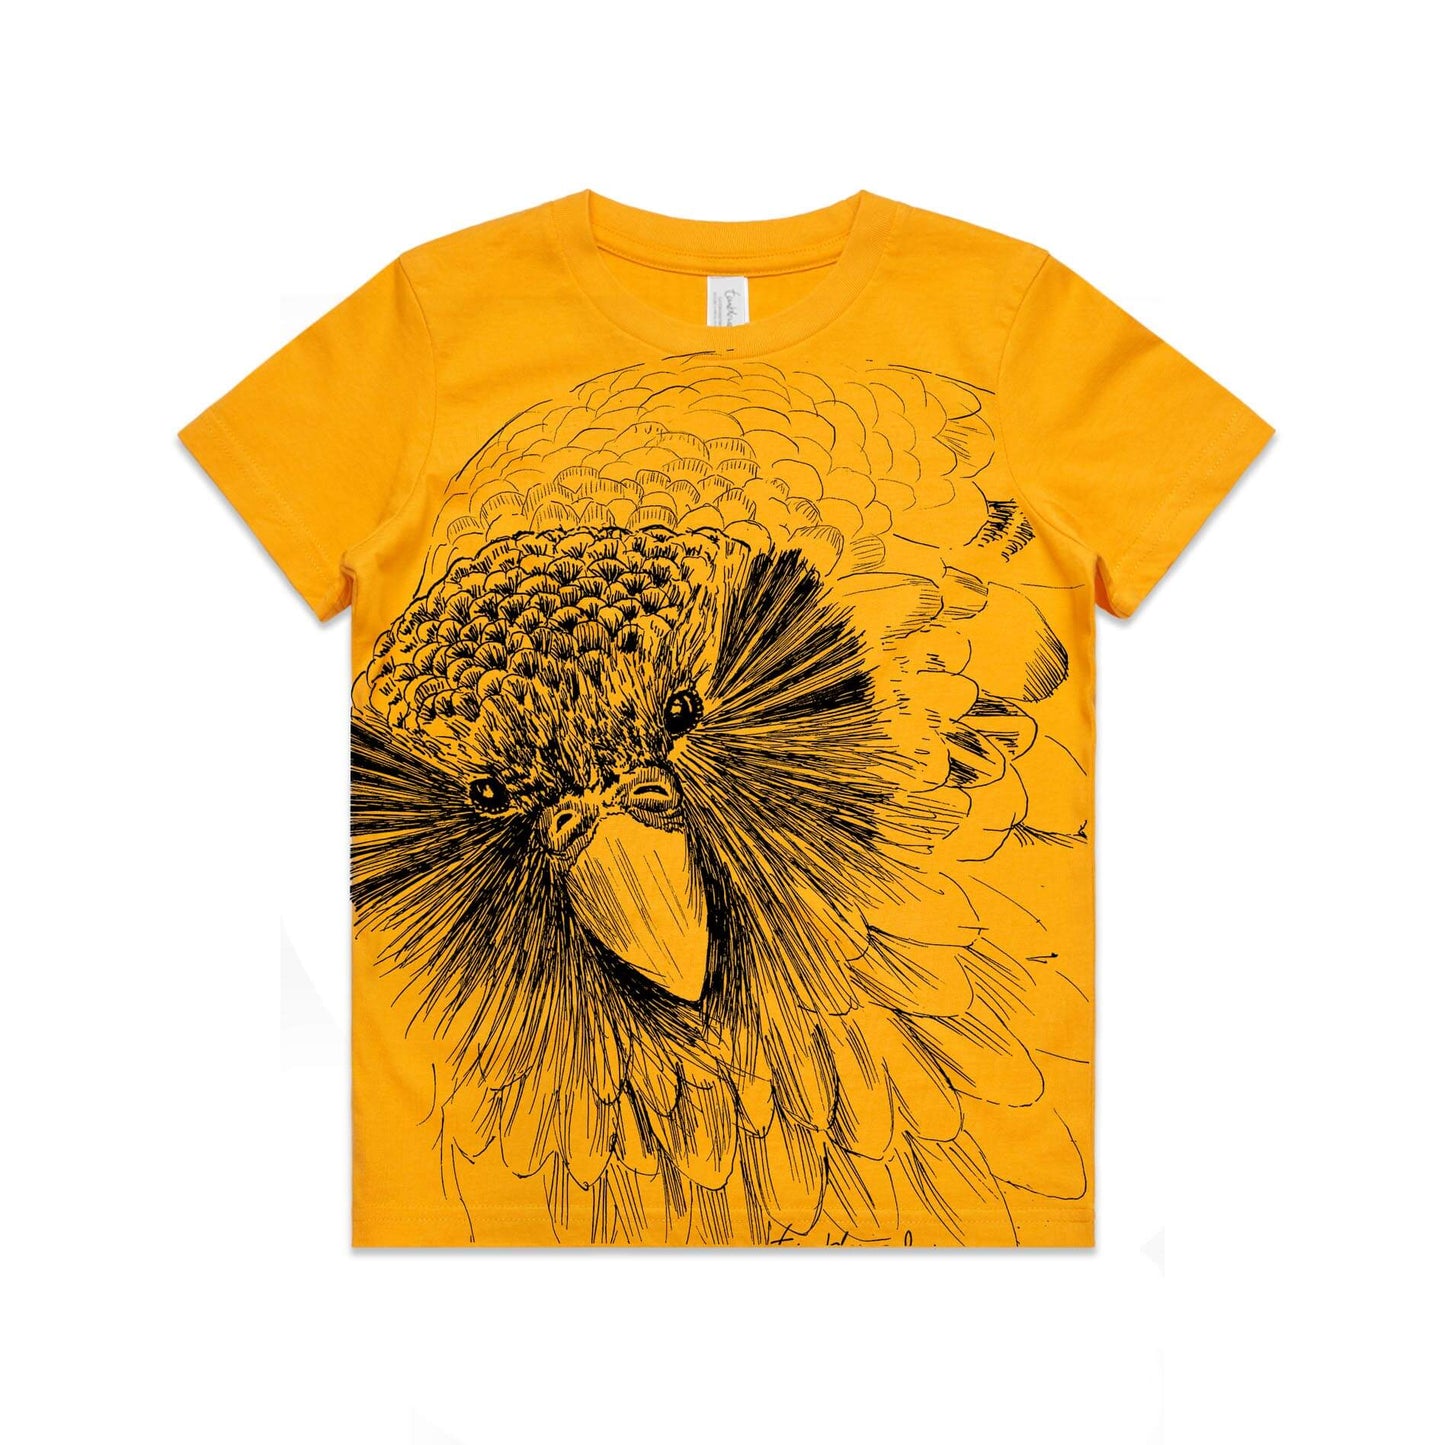 Gold, cotton kids' t-shirt with screen printed Sirocco the Kakapo design.